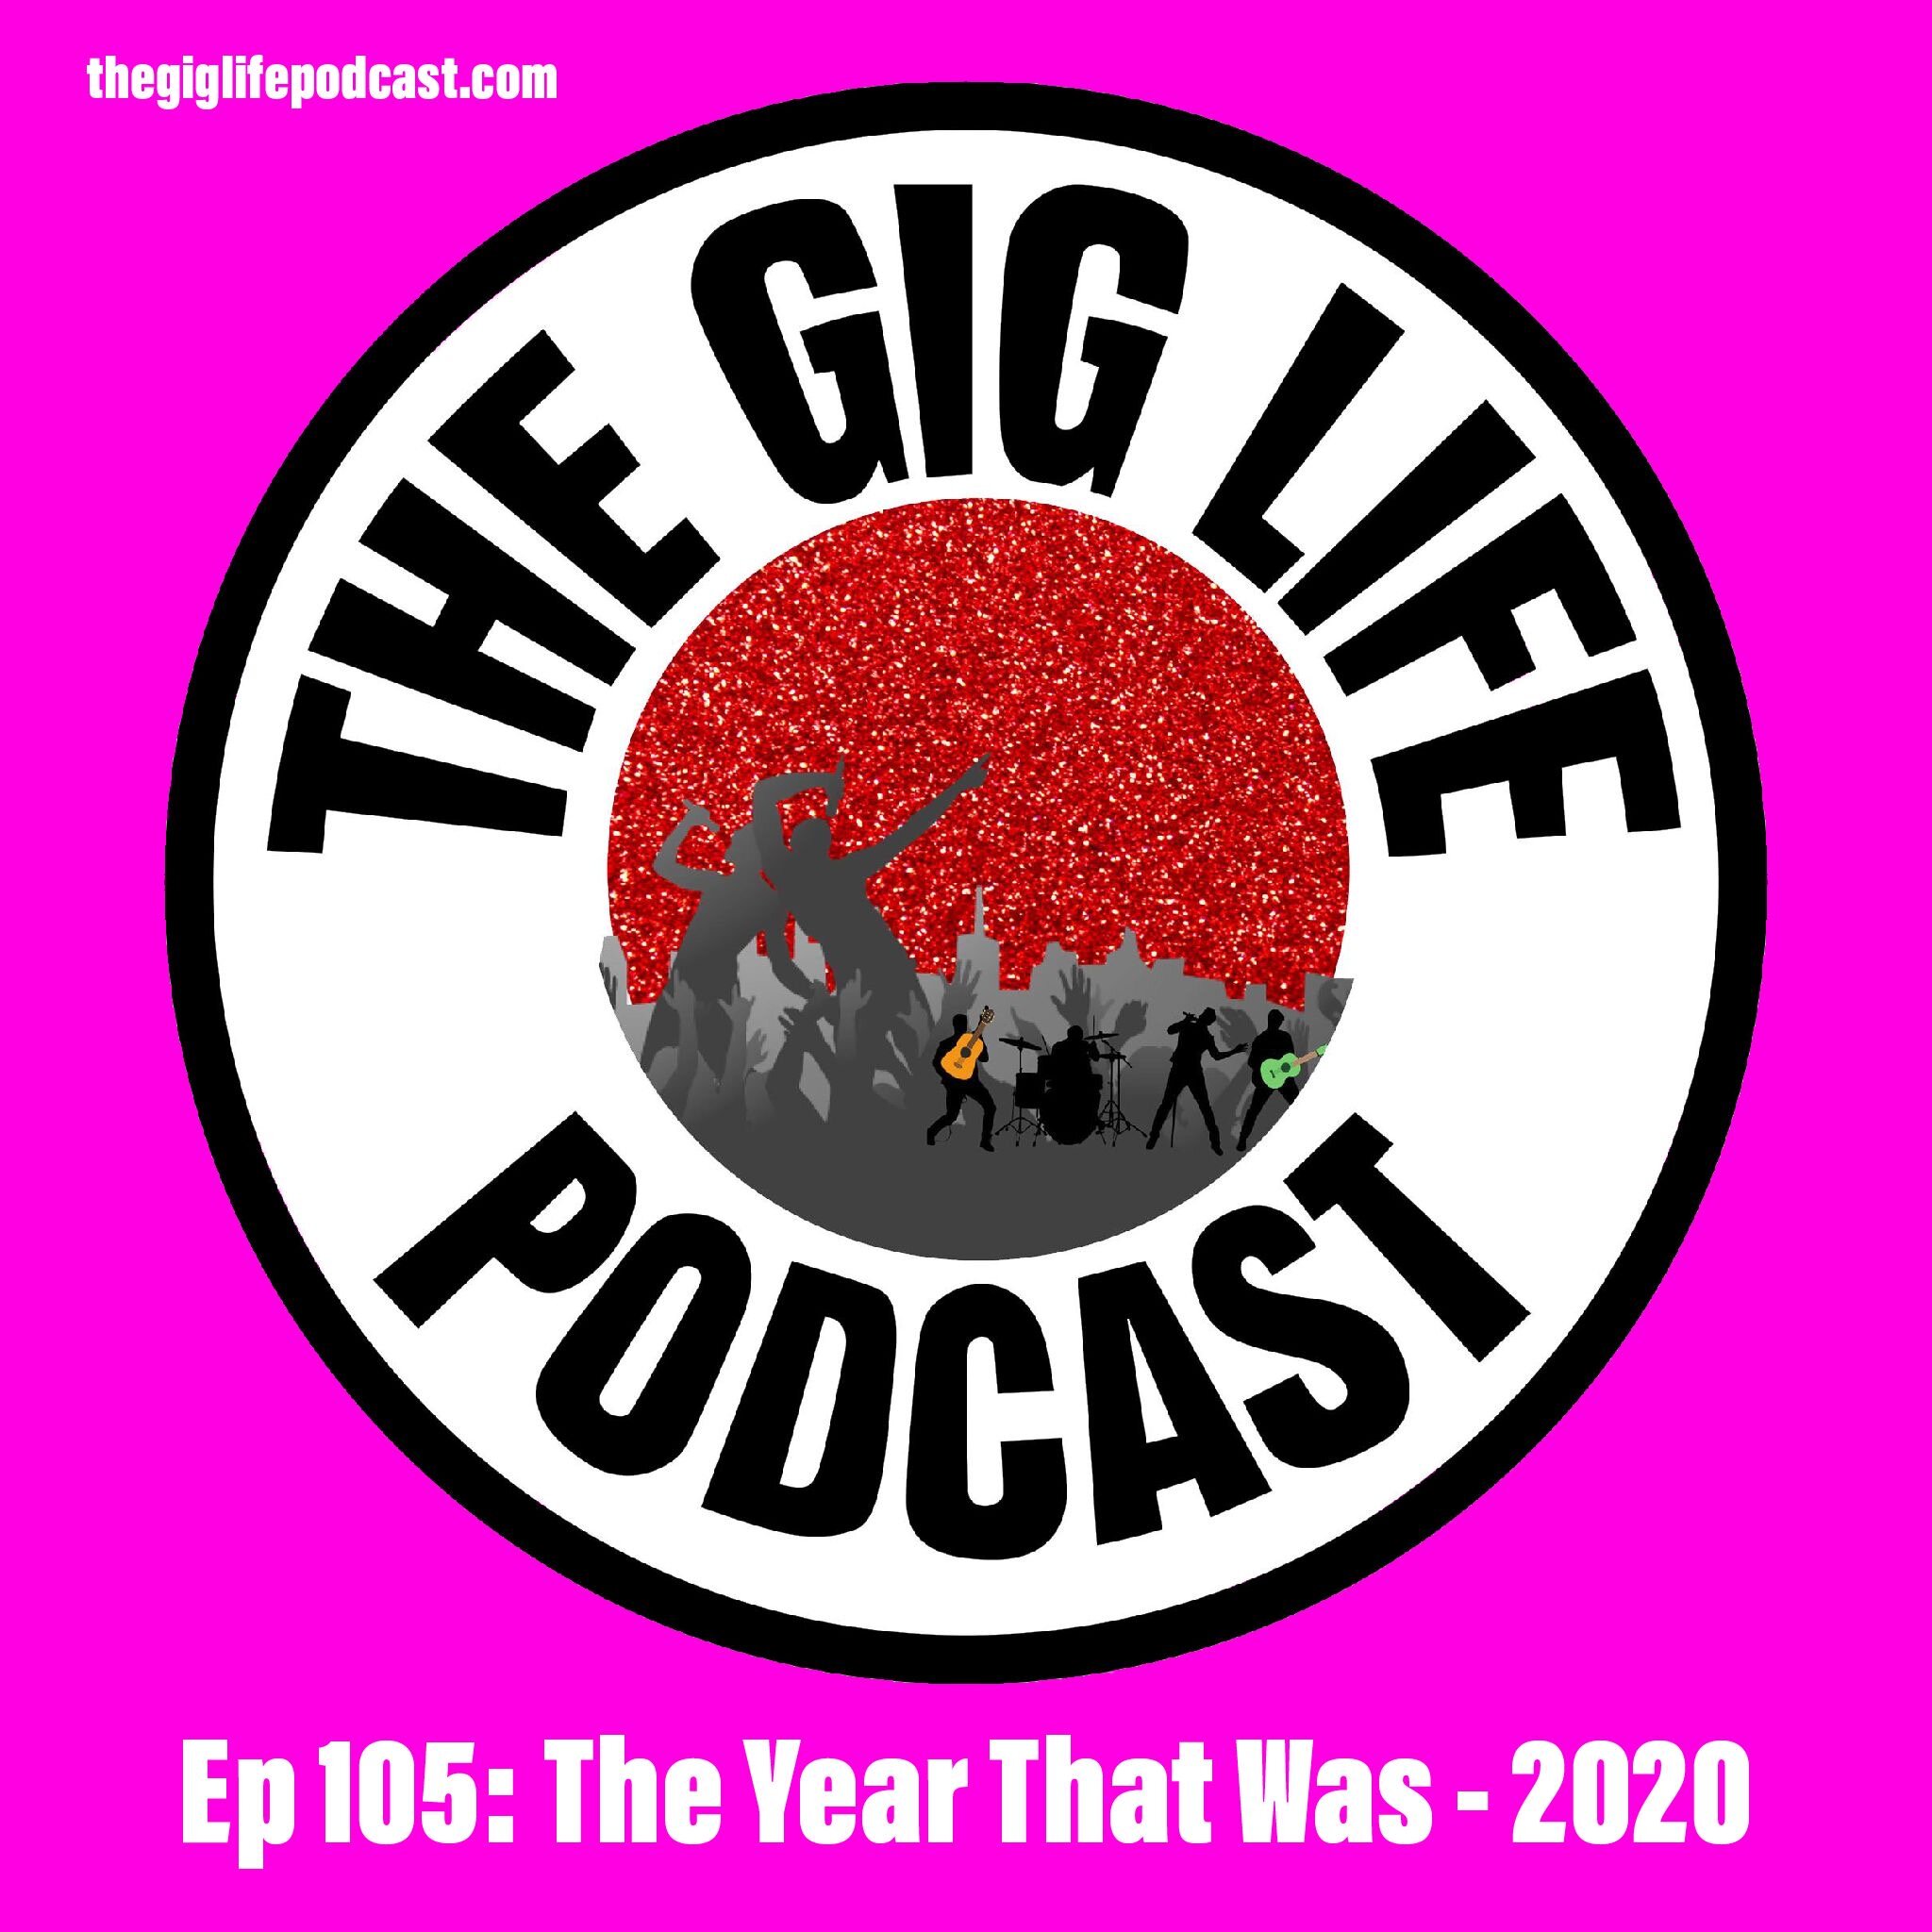 Ep 105: The Year That Was - 2020